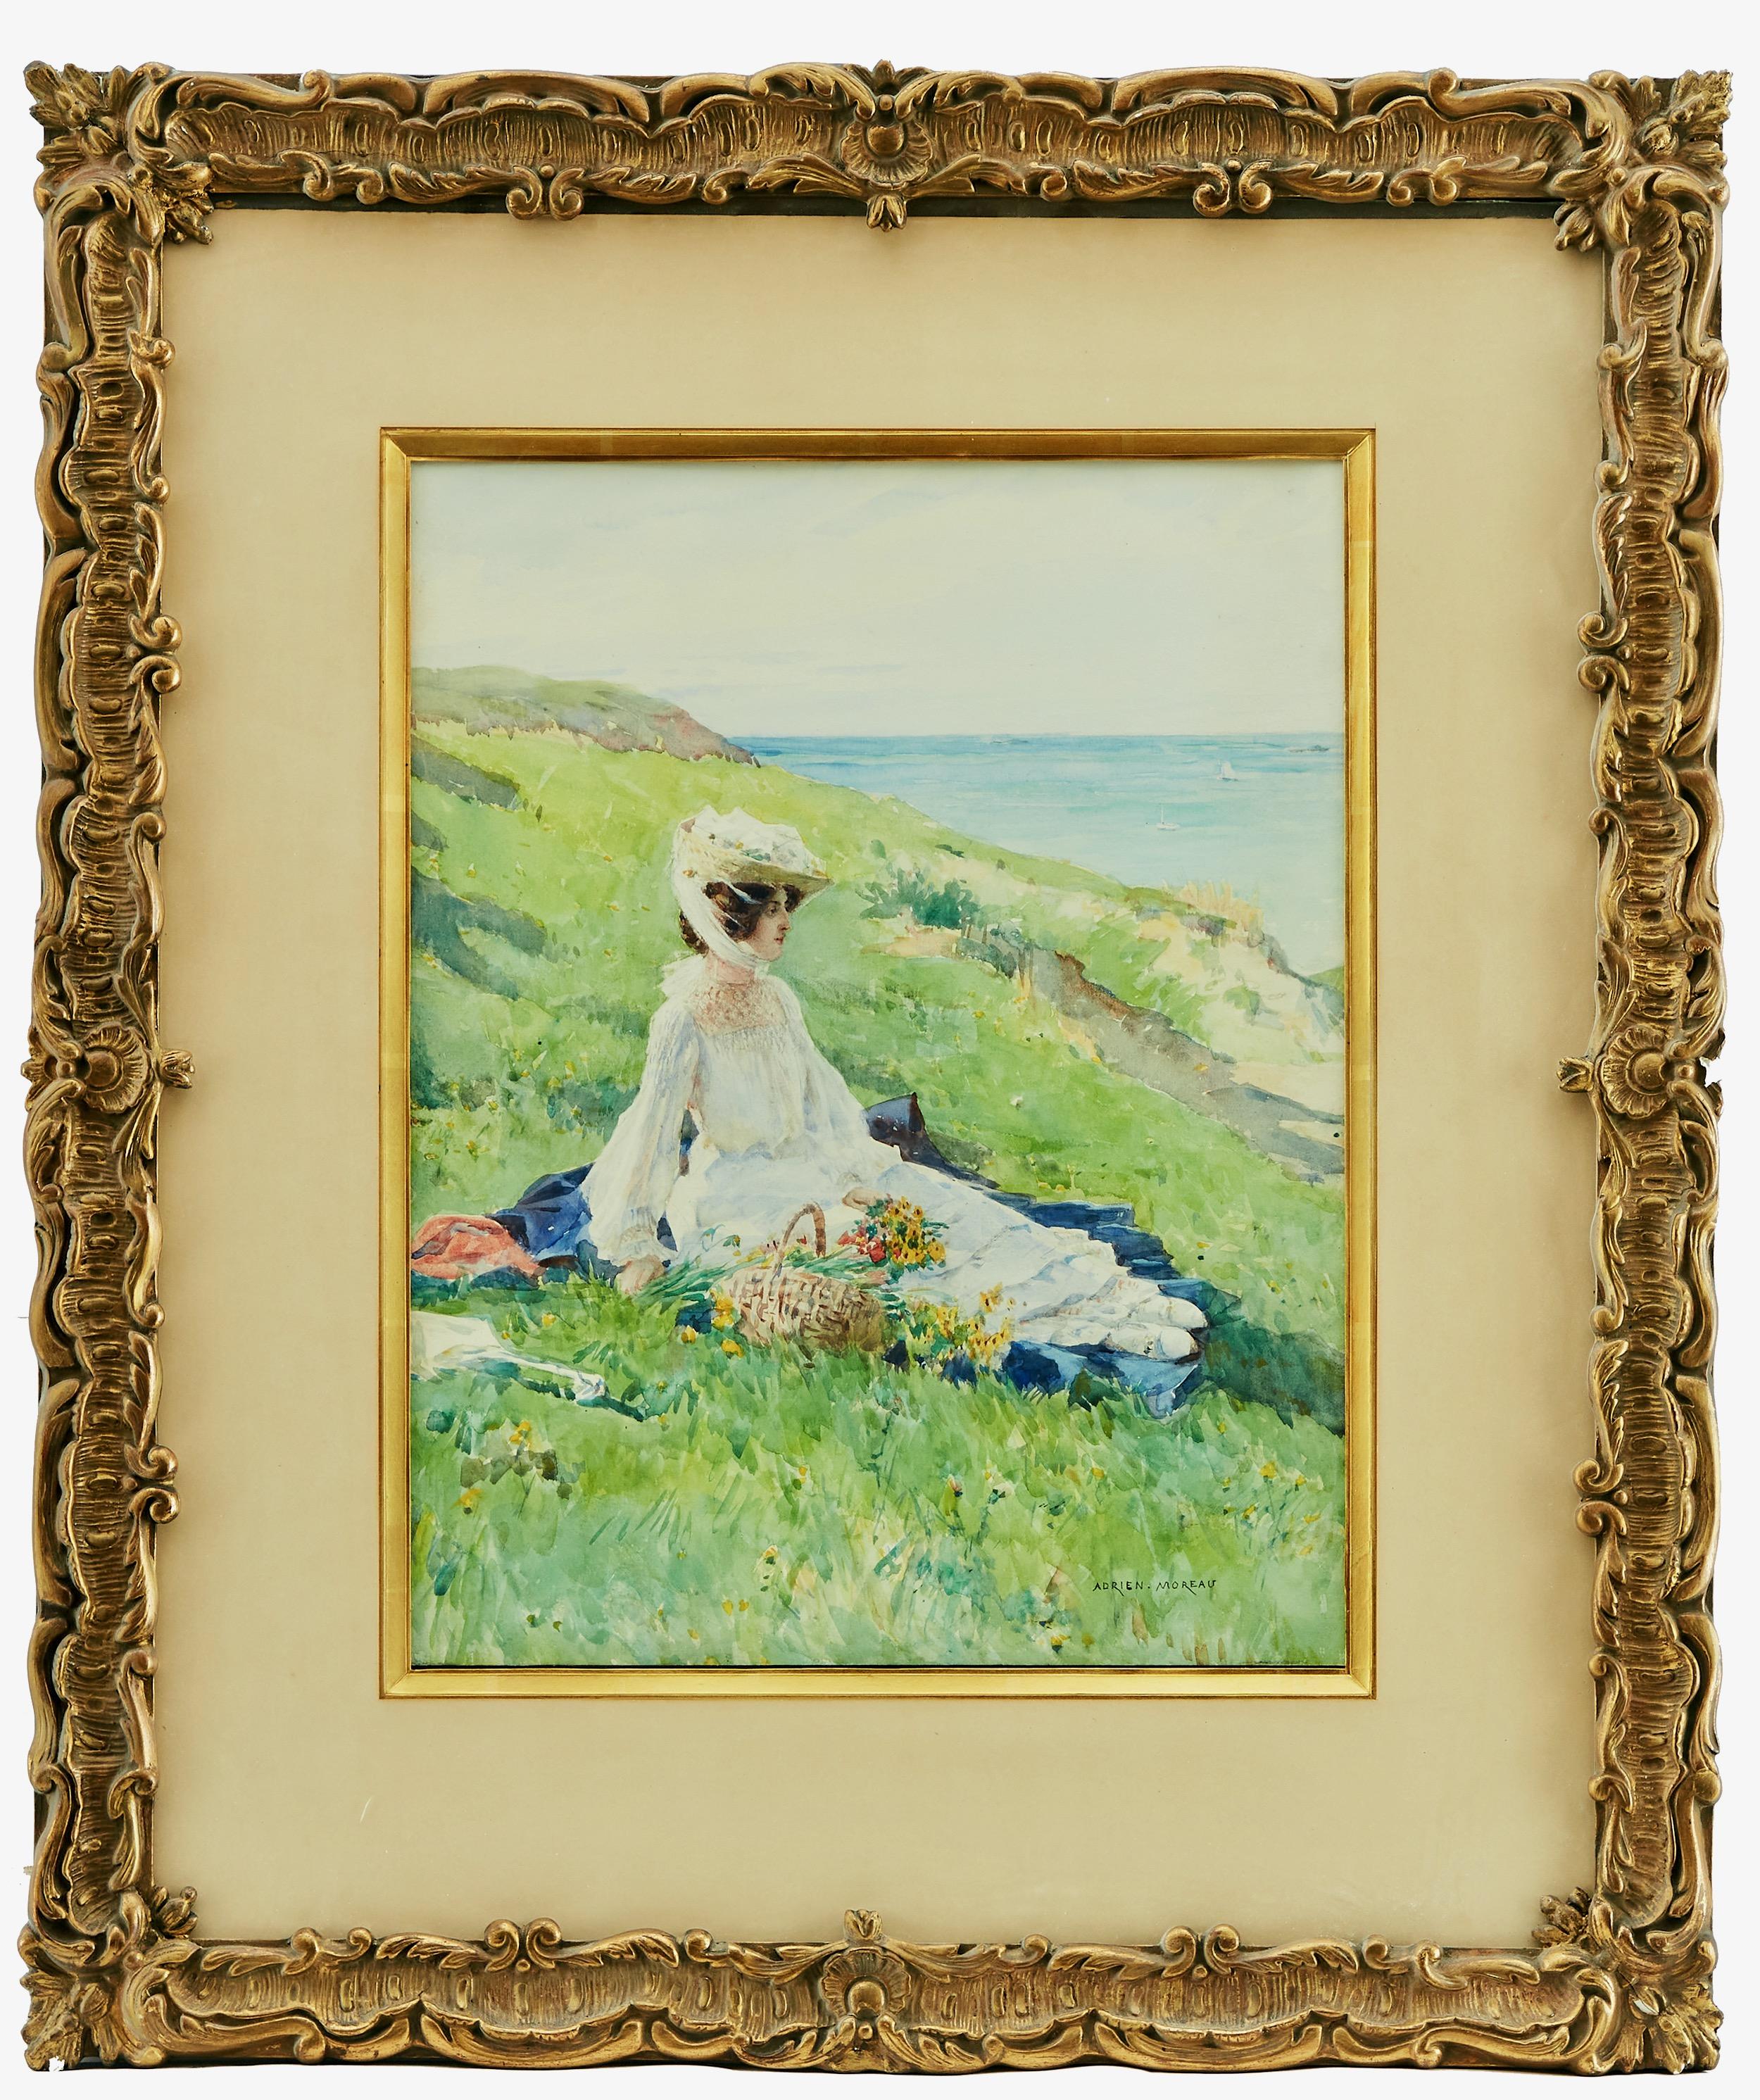 Adrien Moreau Landscape Painting - Woman with Flowers Resting by the Sea. 19th Century Watercolor.